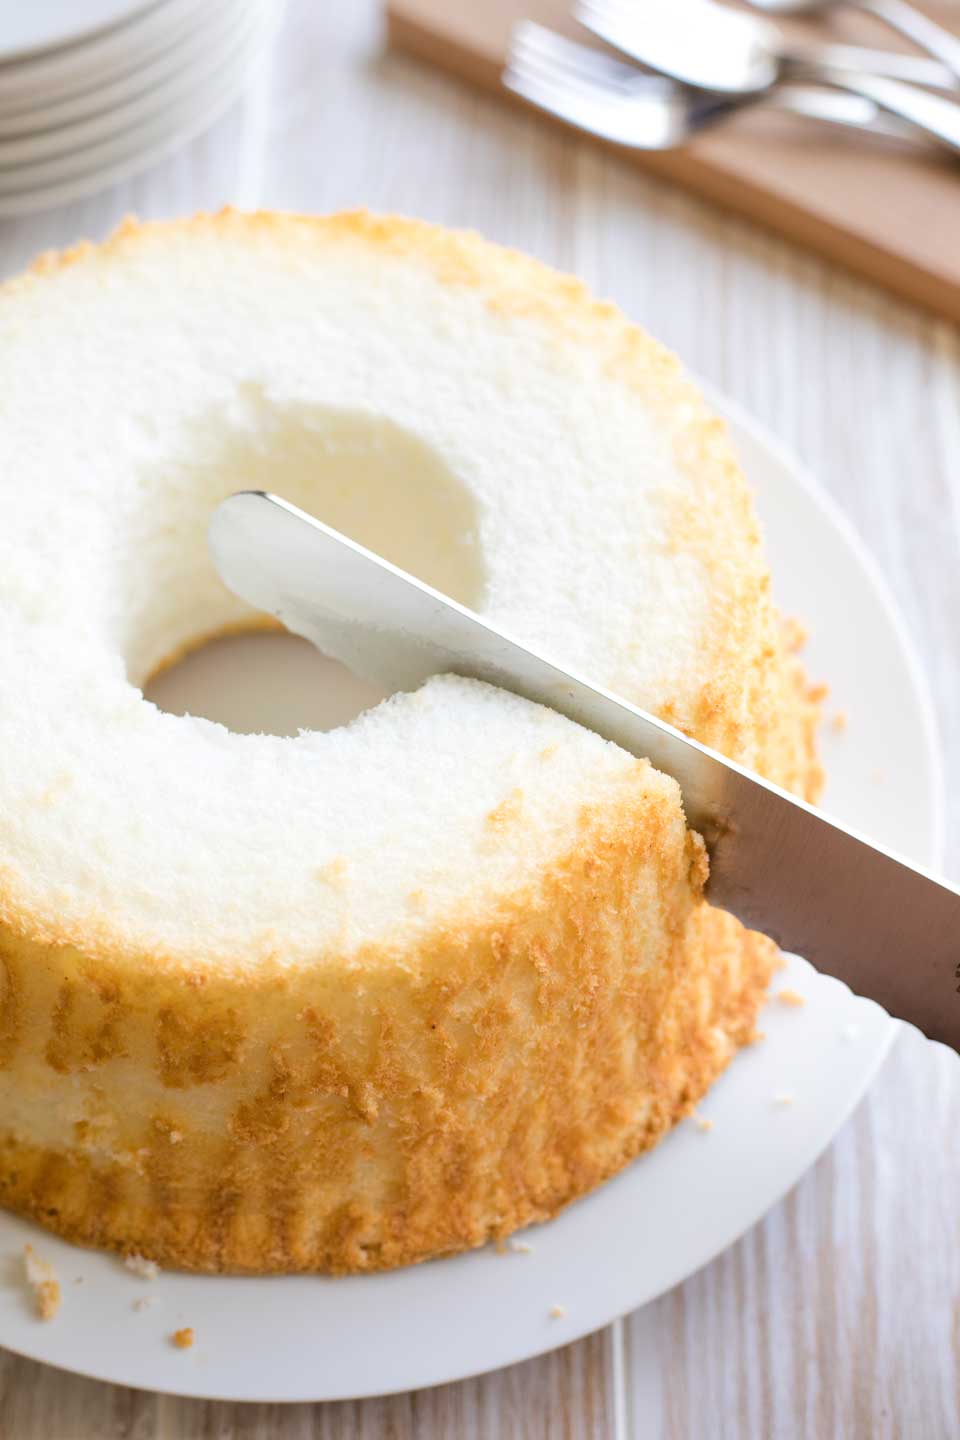 The white plate holds an entire angel cake, with a long serrated knife just beginning to make the first cut.